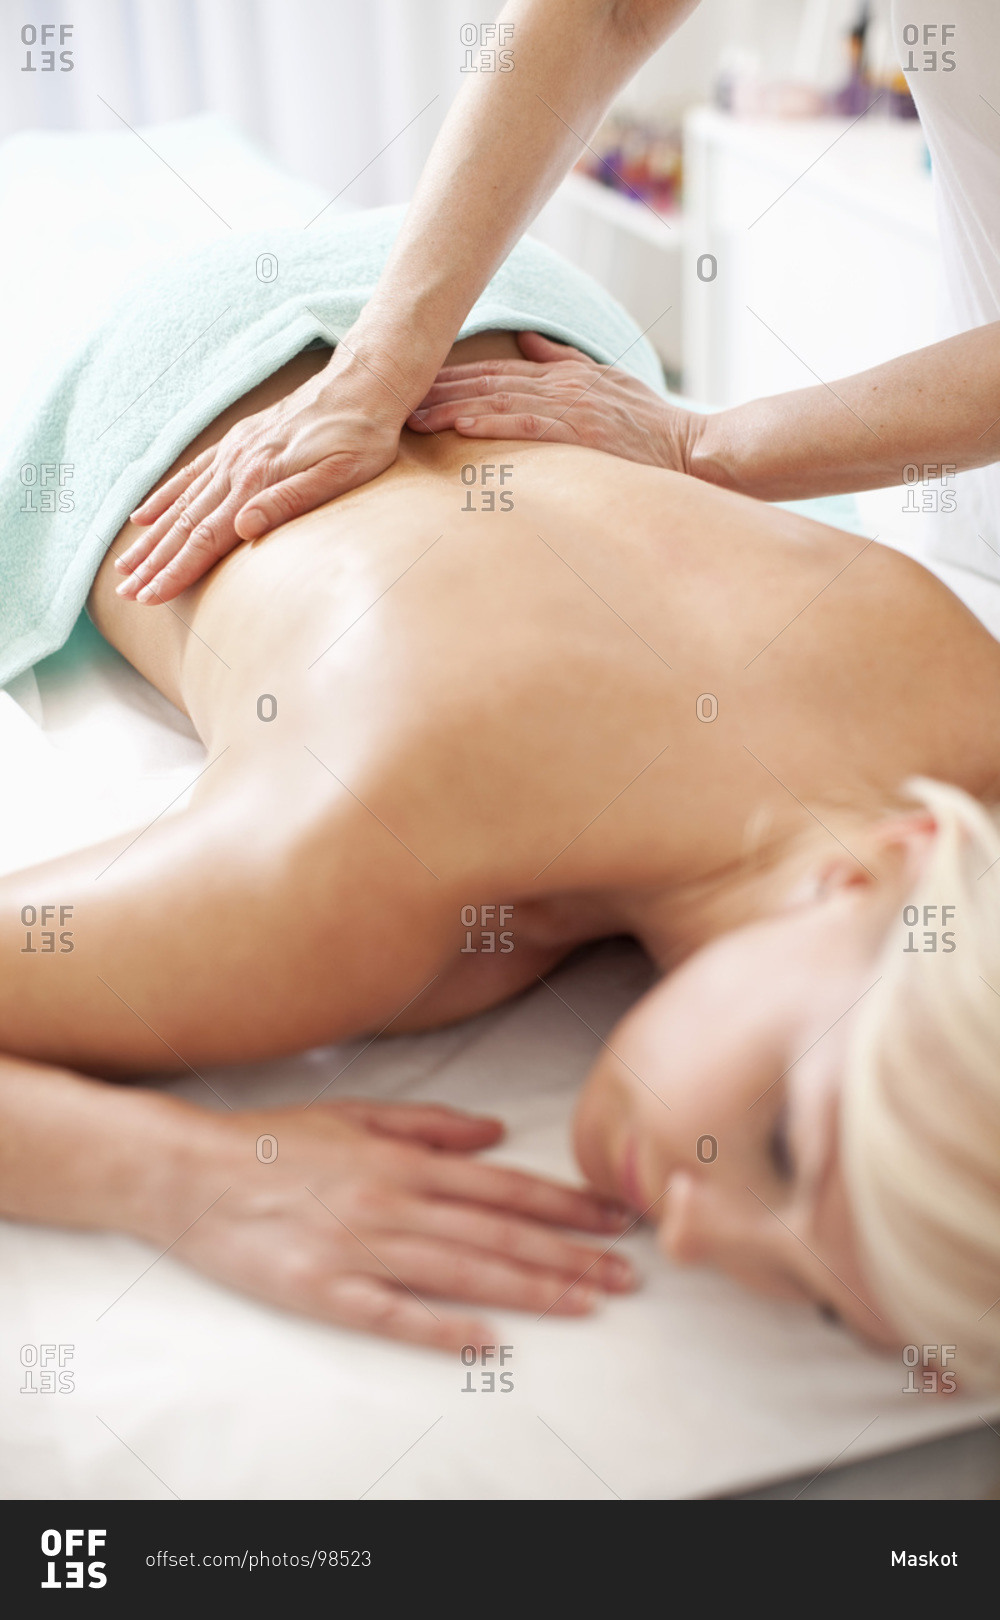 Mid adult woman receiving back massage from masseur at health spa